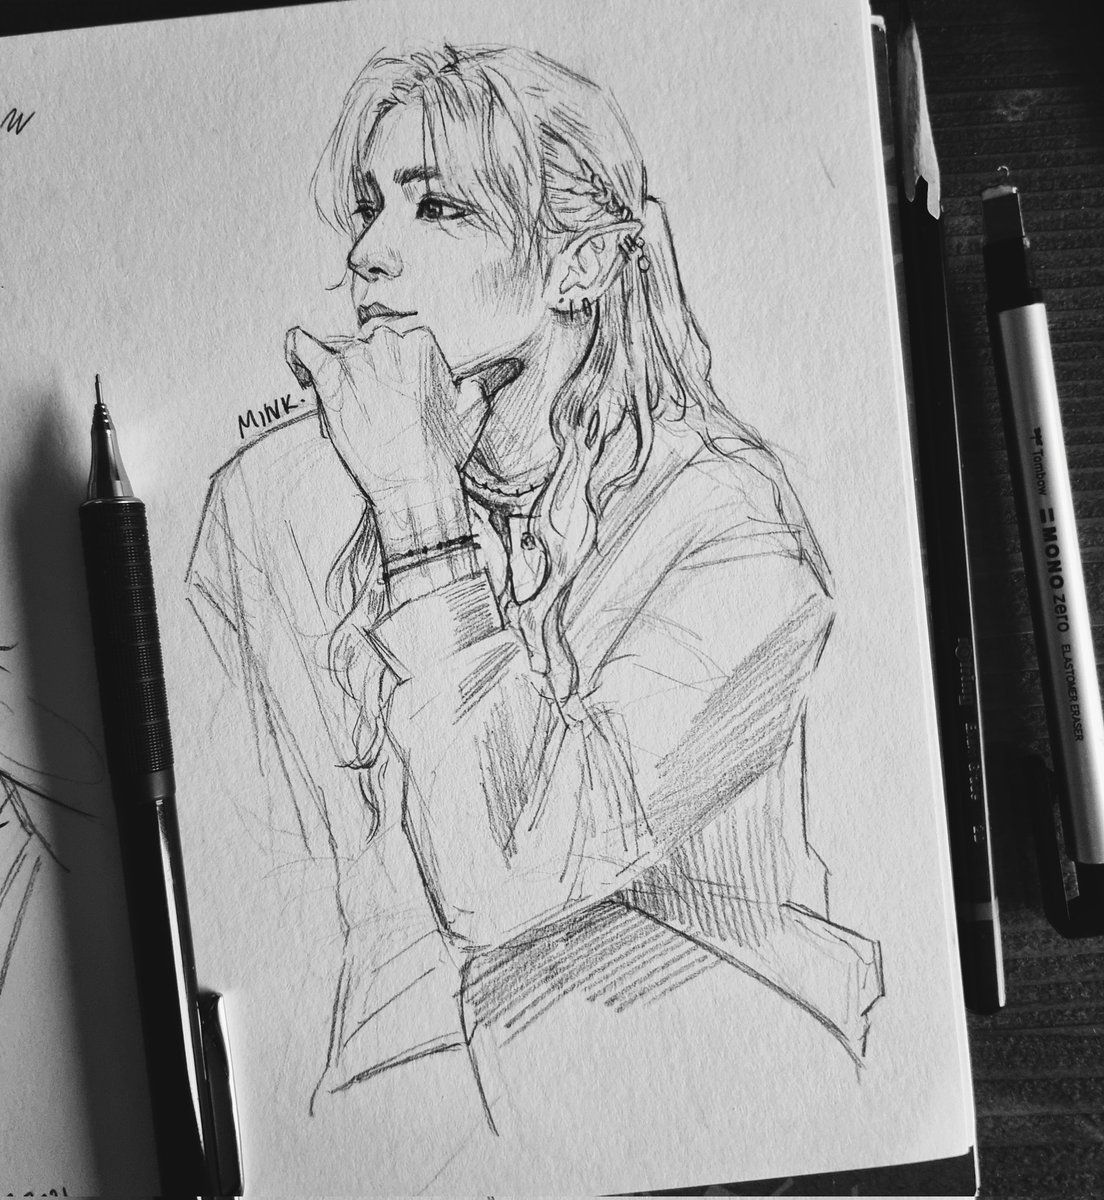 Sketched the soft elf boi with a smol braid on his hair, now I shall go cry over him 😔👍🏼
#ATEEZfanart #정윤호 